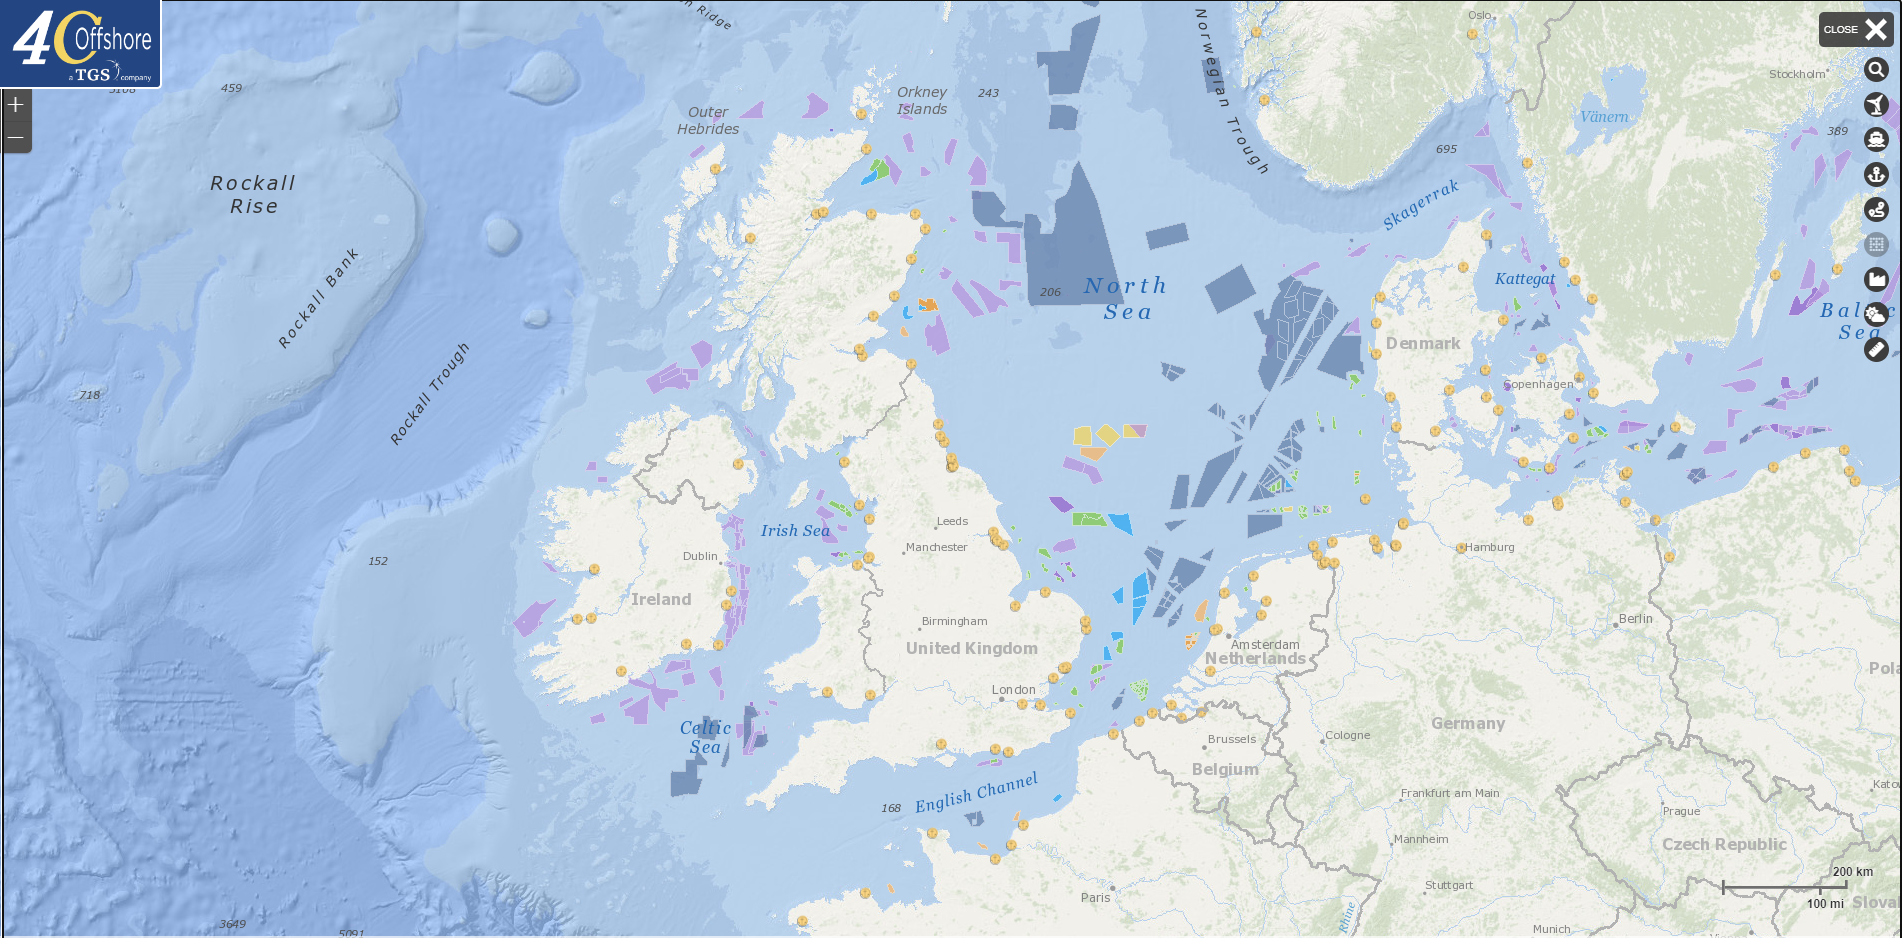 Global Offshore Wind Farm Map